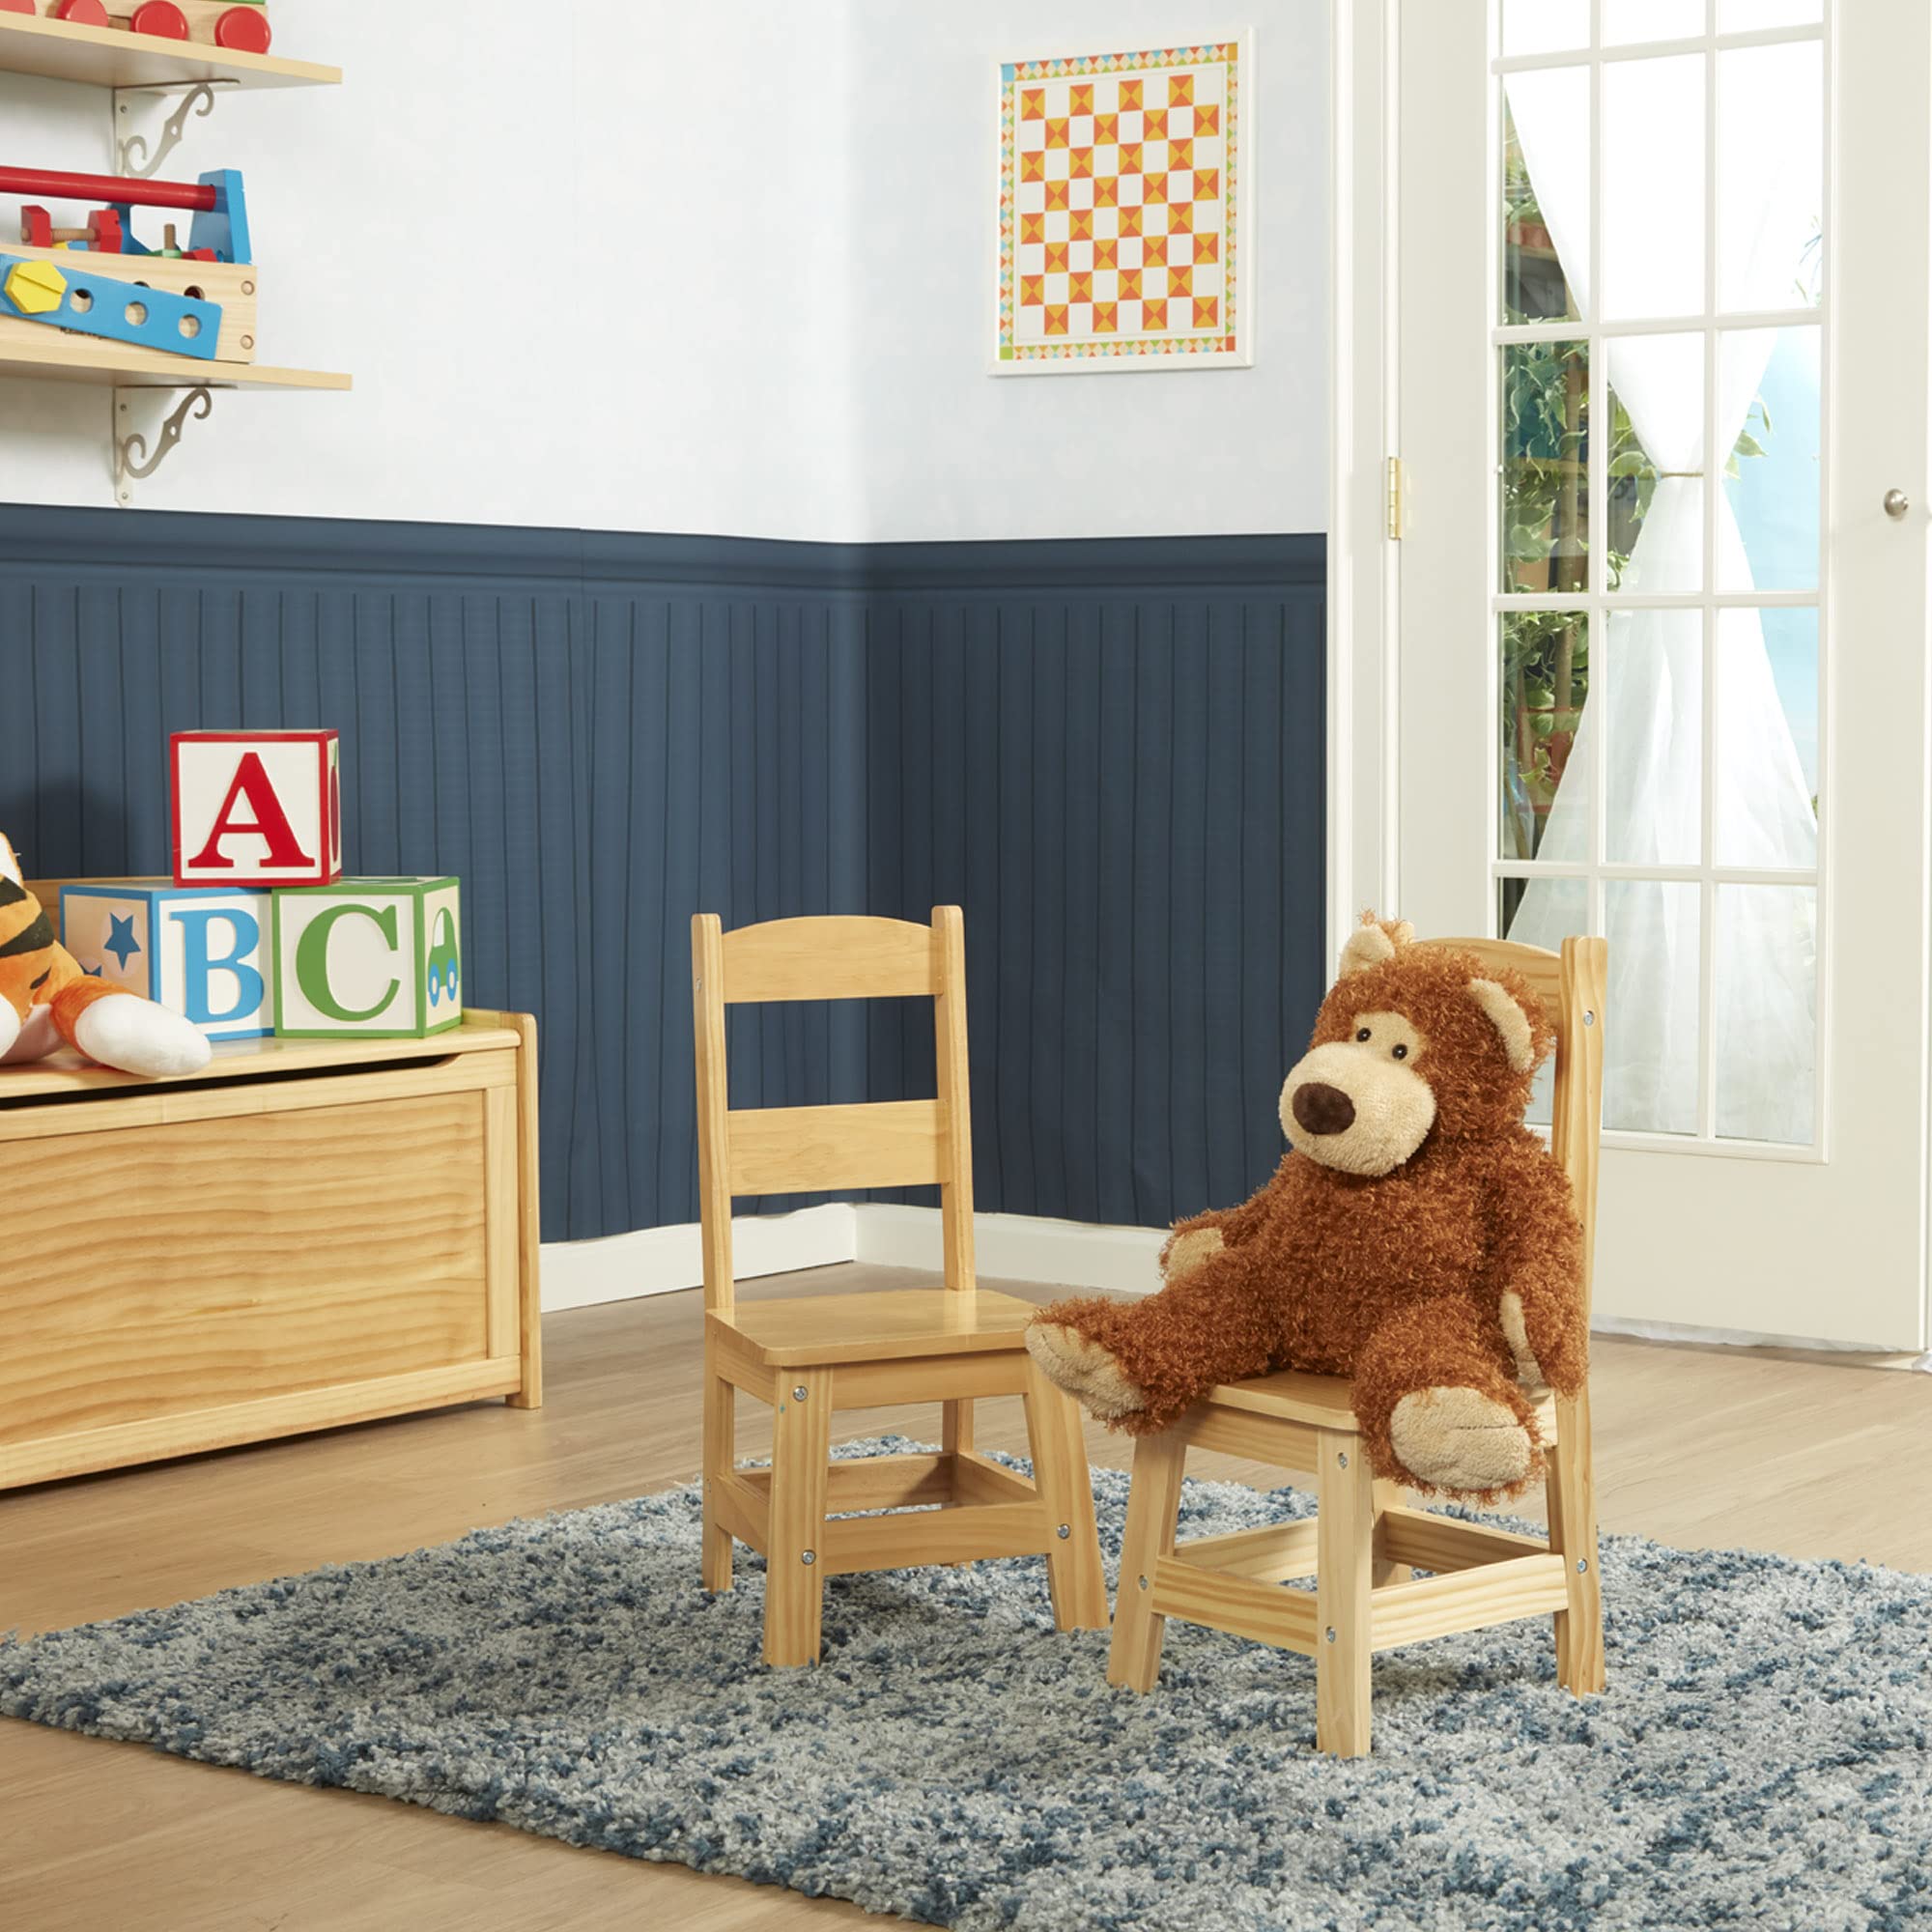 Melissa & Doug Wooden Chairs, Set of 2 - Blonde Furniture for Playroom - Kids Wooden Chairs, Children's Wooden Playroom Furniture